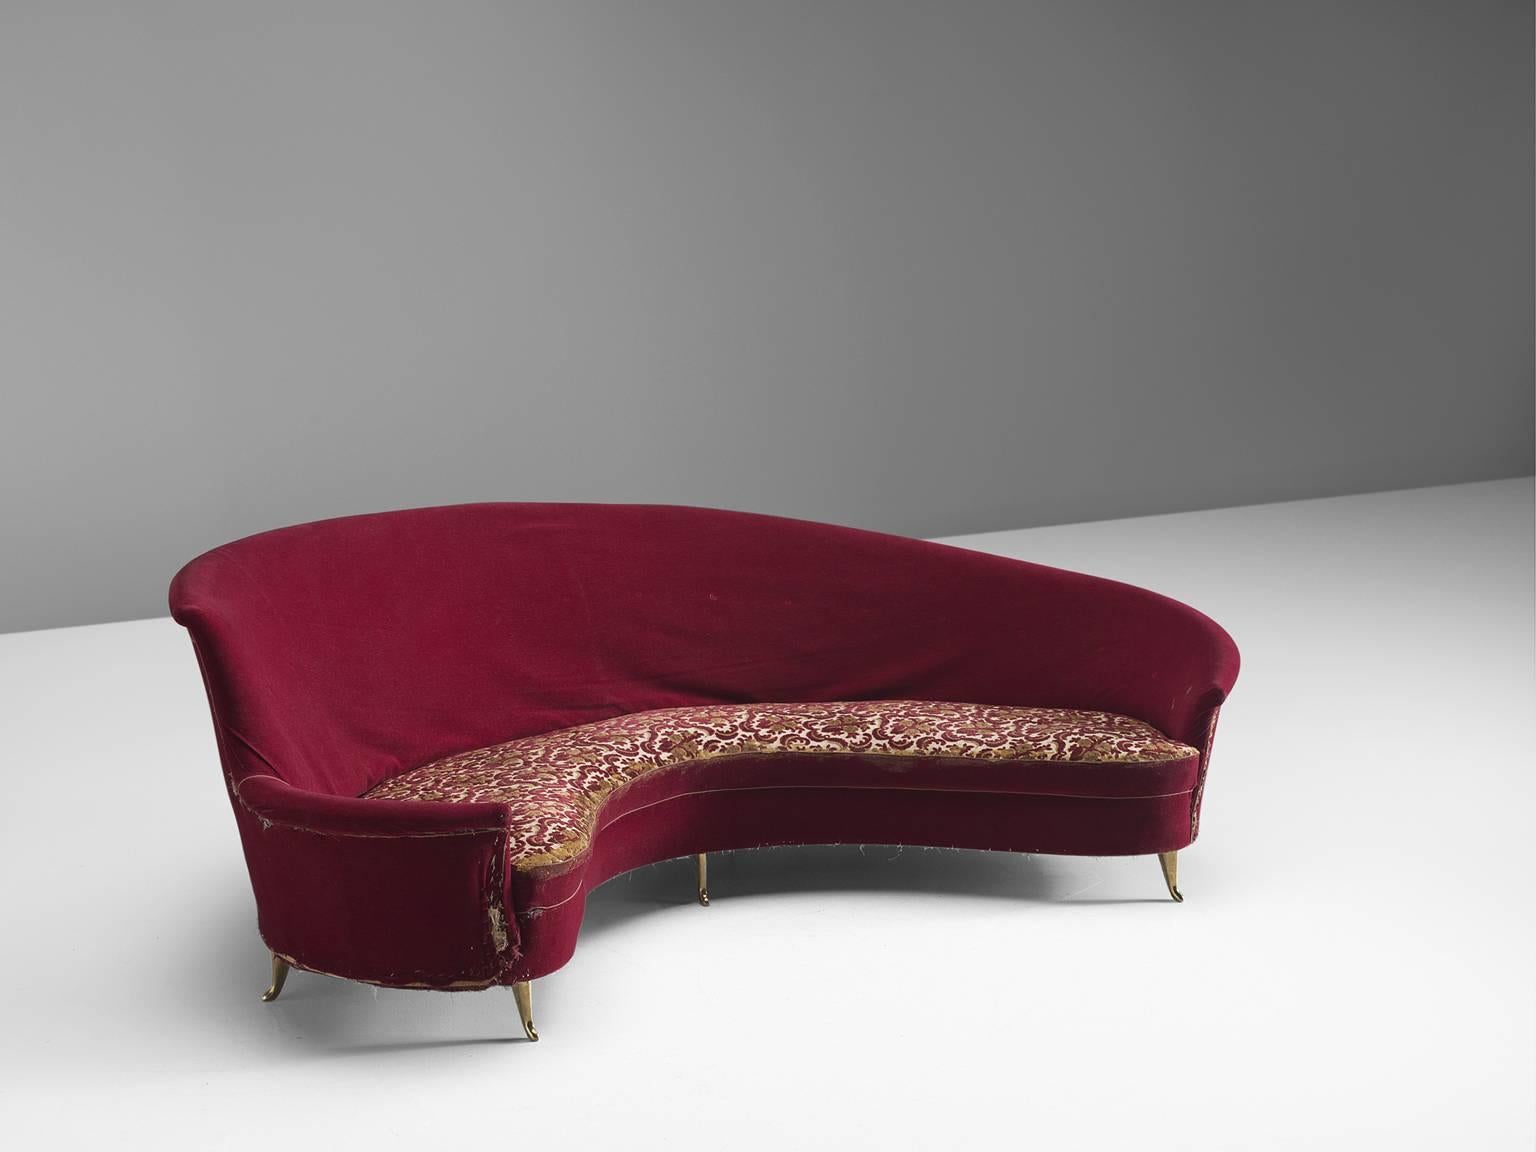 Settee, red and floral fabric (re-upholstery needed) and brass, Italy, 1950s

This dynamic sofa features an a-symmetrical back that is higher on the left side and slowly slopes towards much lower end on the right side. The six tapered delicate